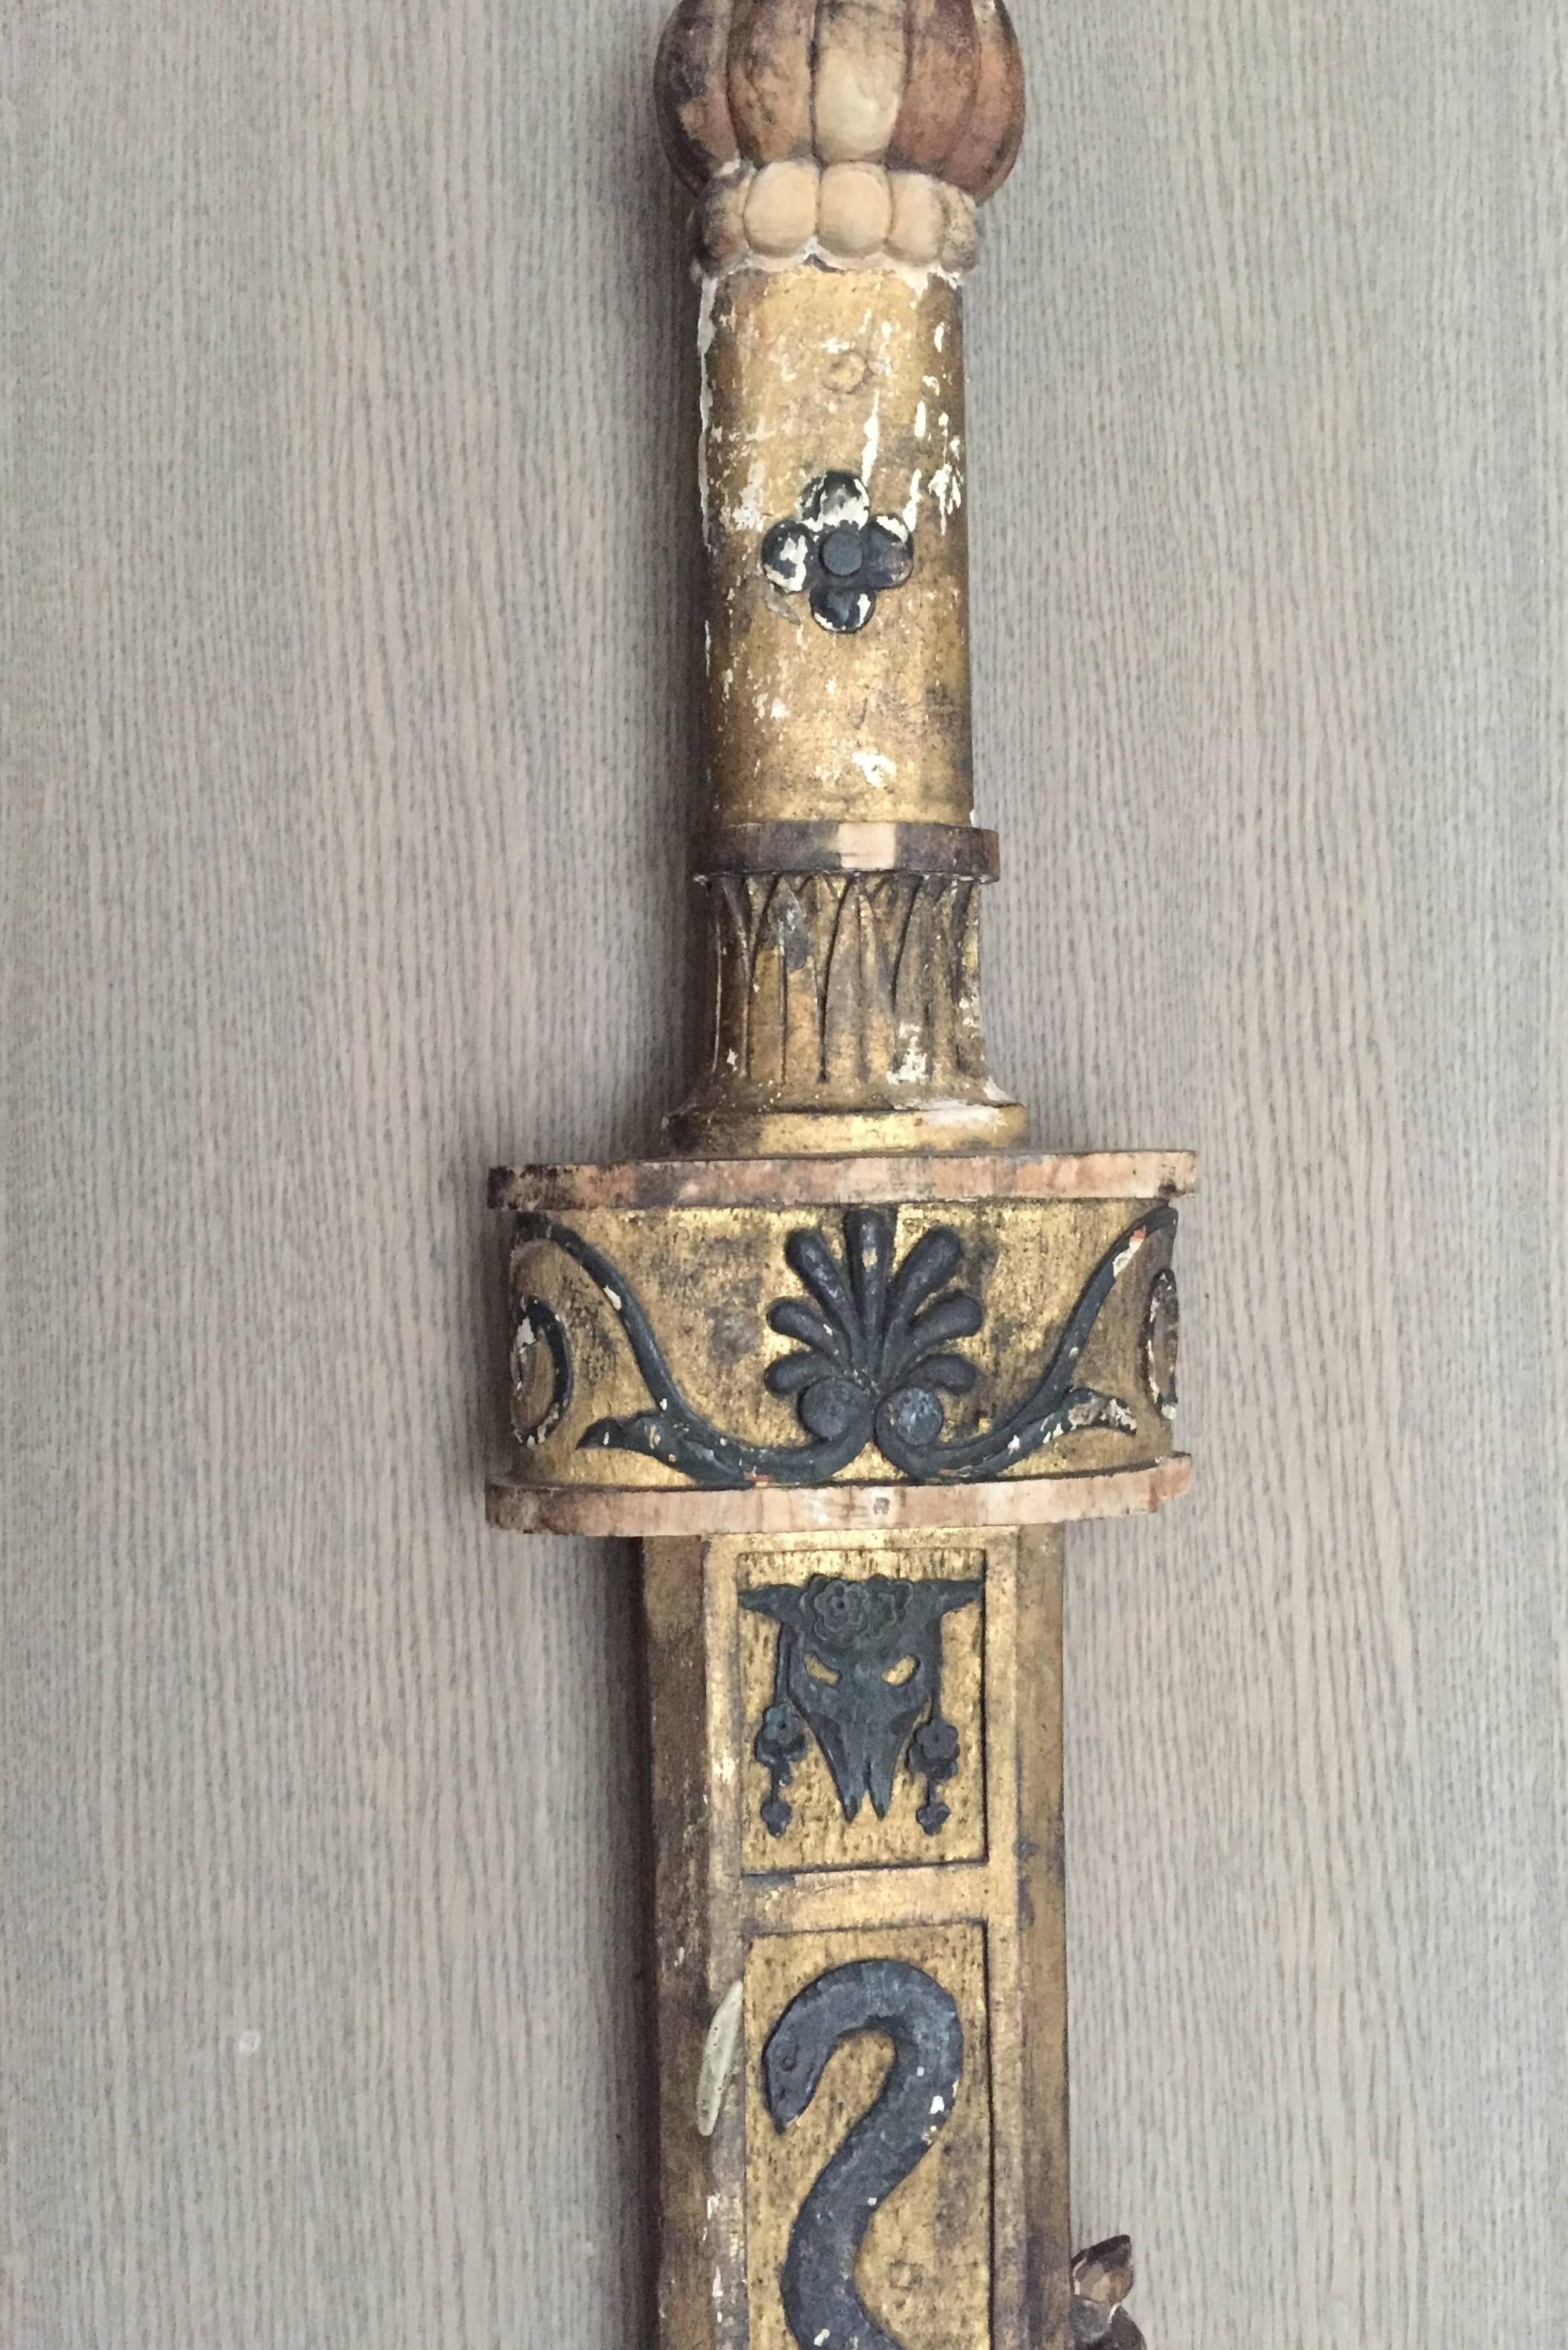 Highly decorative and elegant period neoclassical Italian carved wood sword. This sword was made as part of an ornate paneling and has the classical elements of the Roman Empire that popularized neoclassical design at the beginning of the 18th